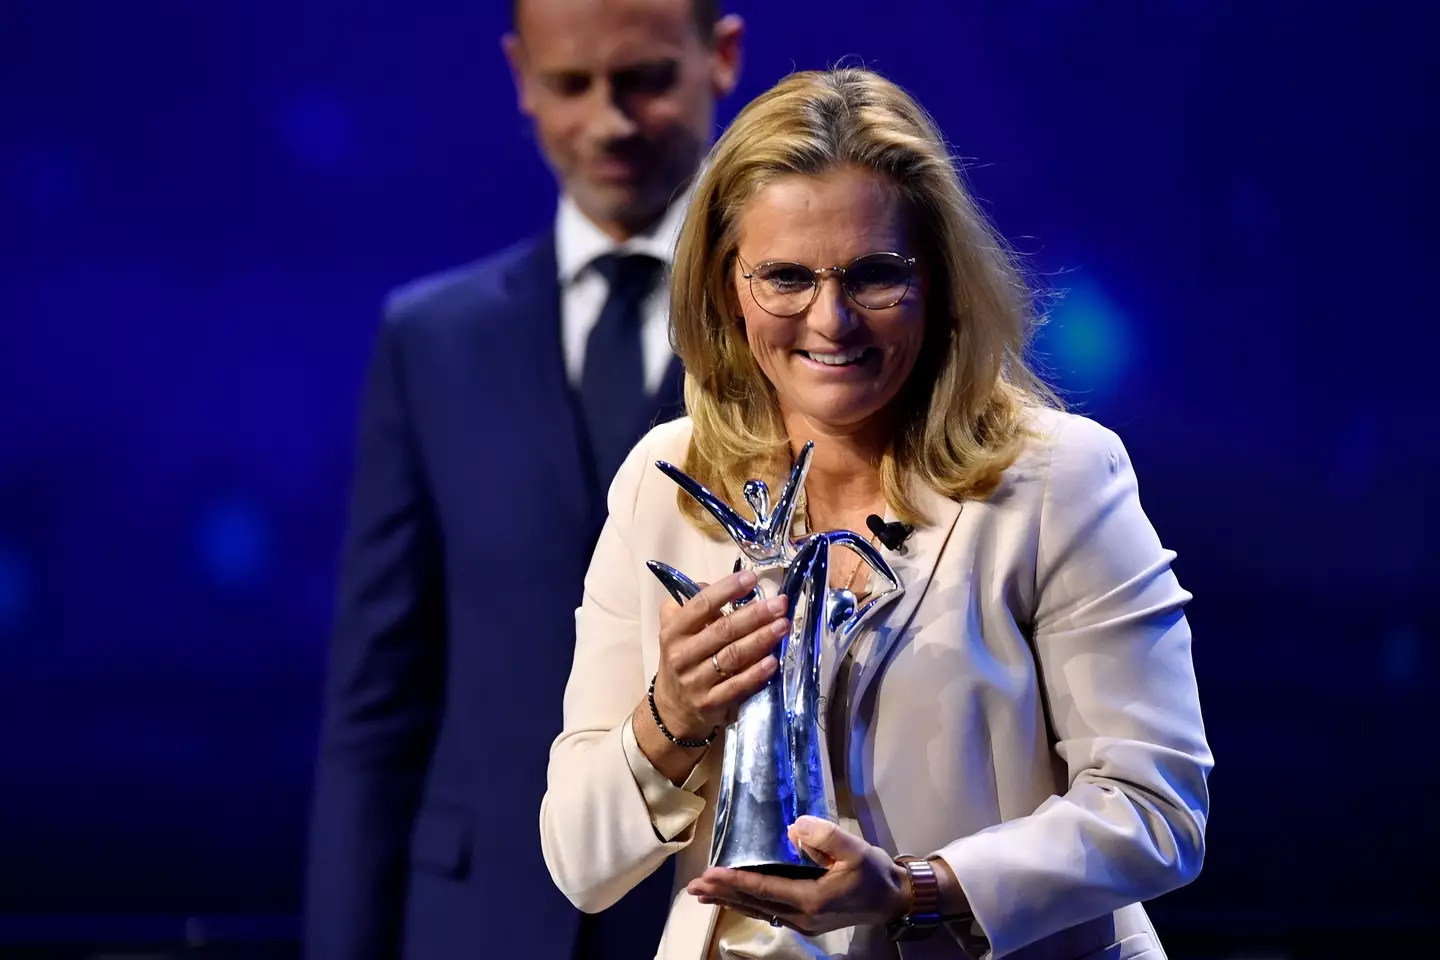 Sarina Wiegman was a deserving winner but Ceferin's comments cast a cloud on her award win. (